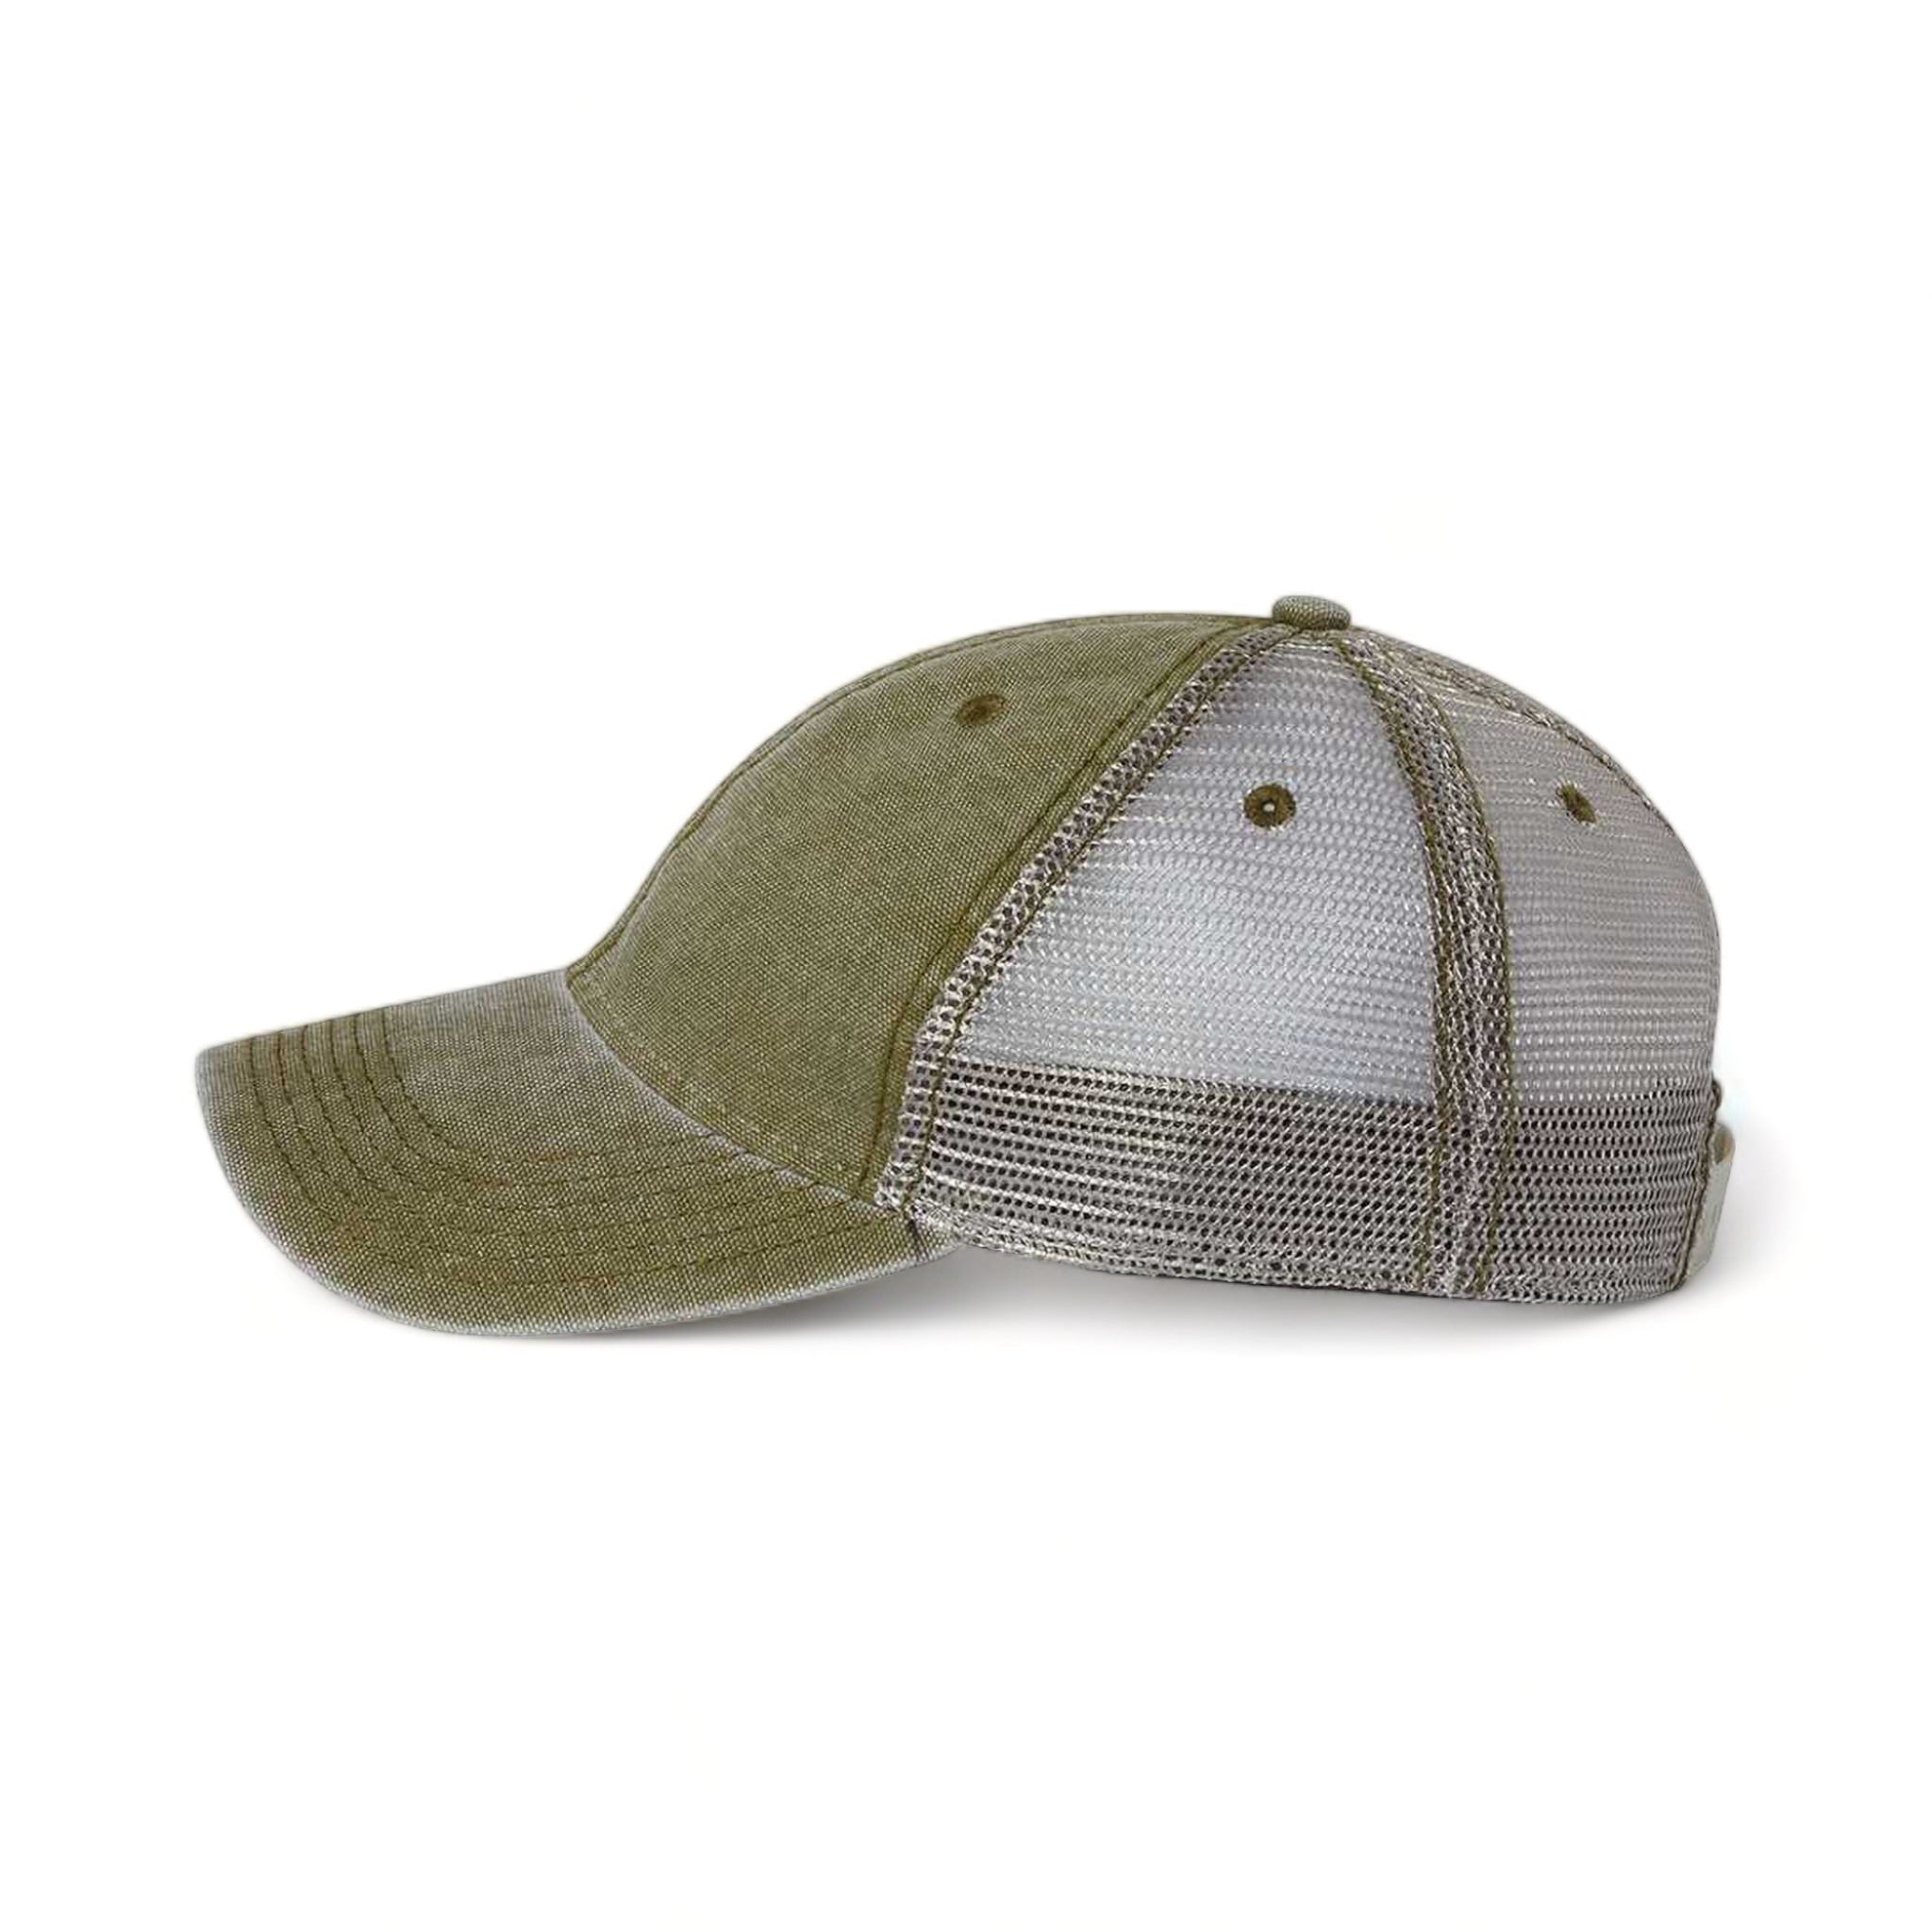 Side view of LEGACY DTA custom hat in olive and grey